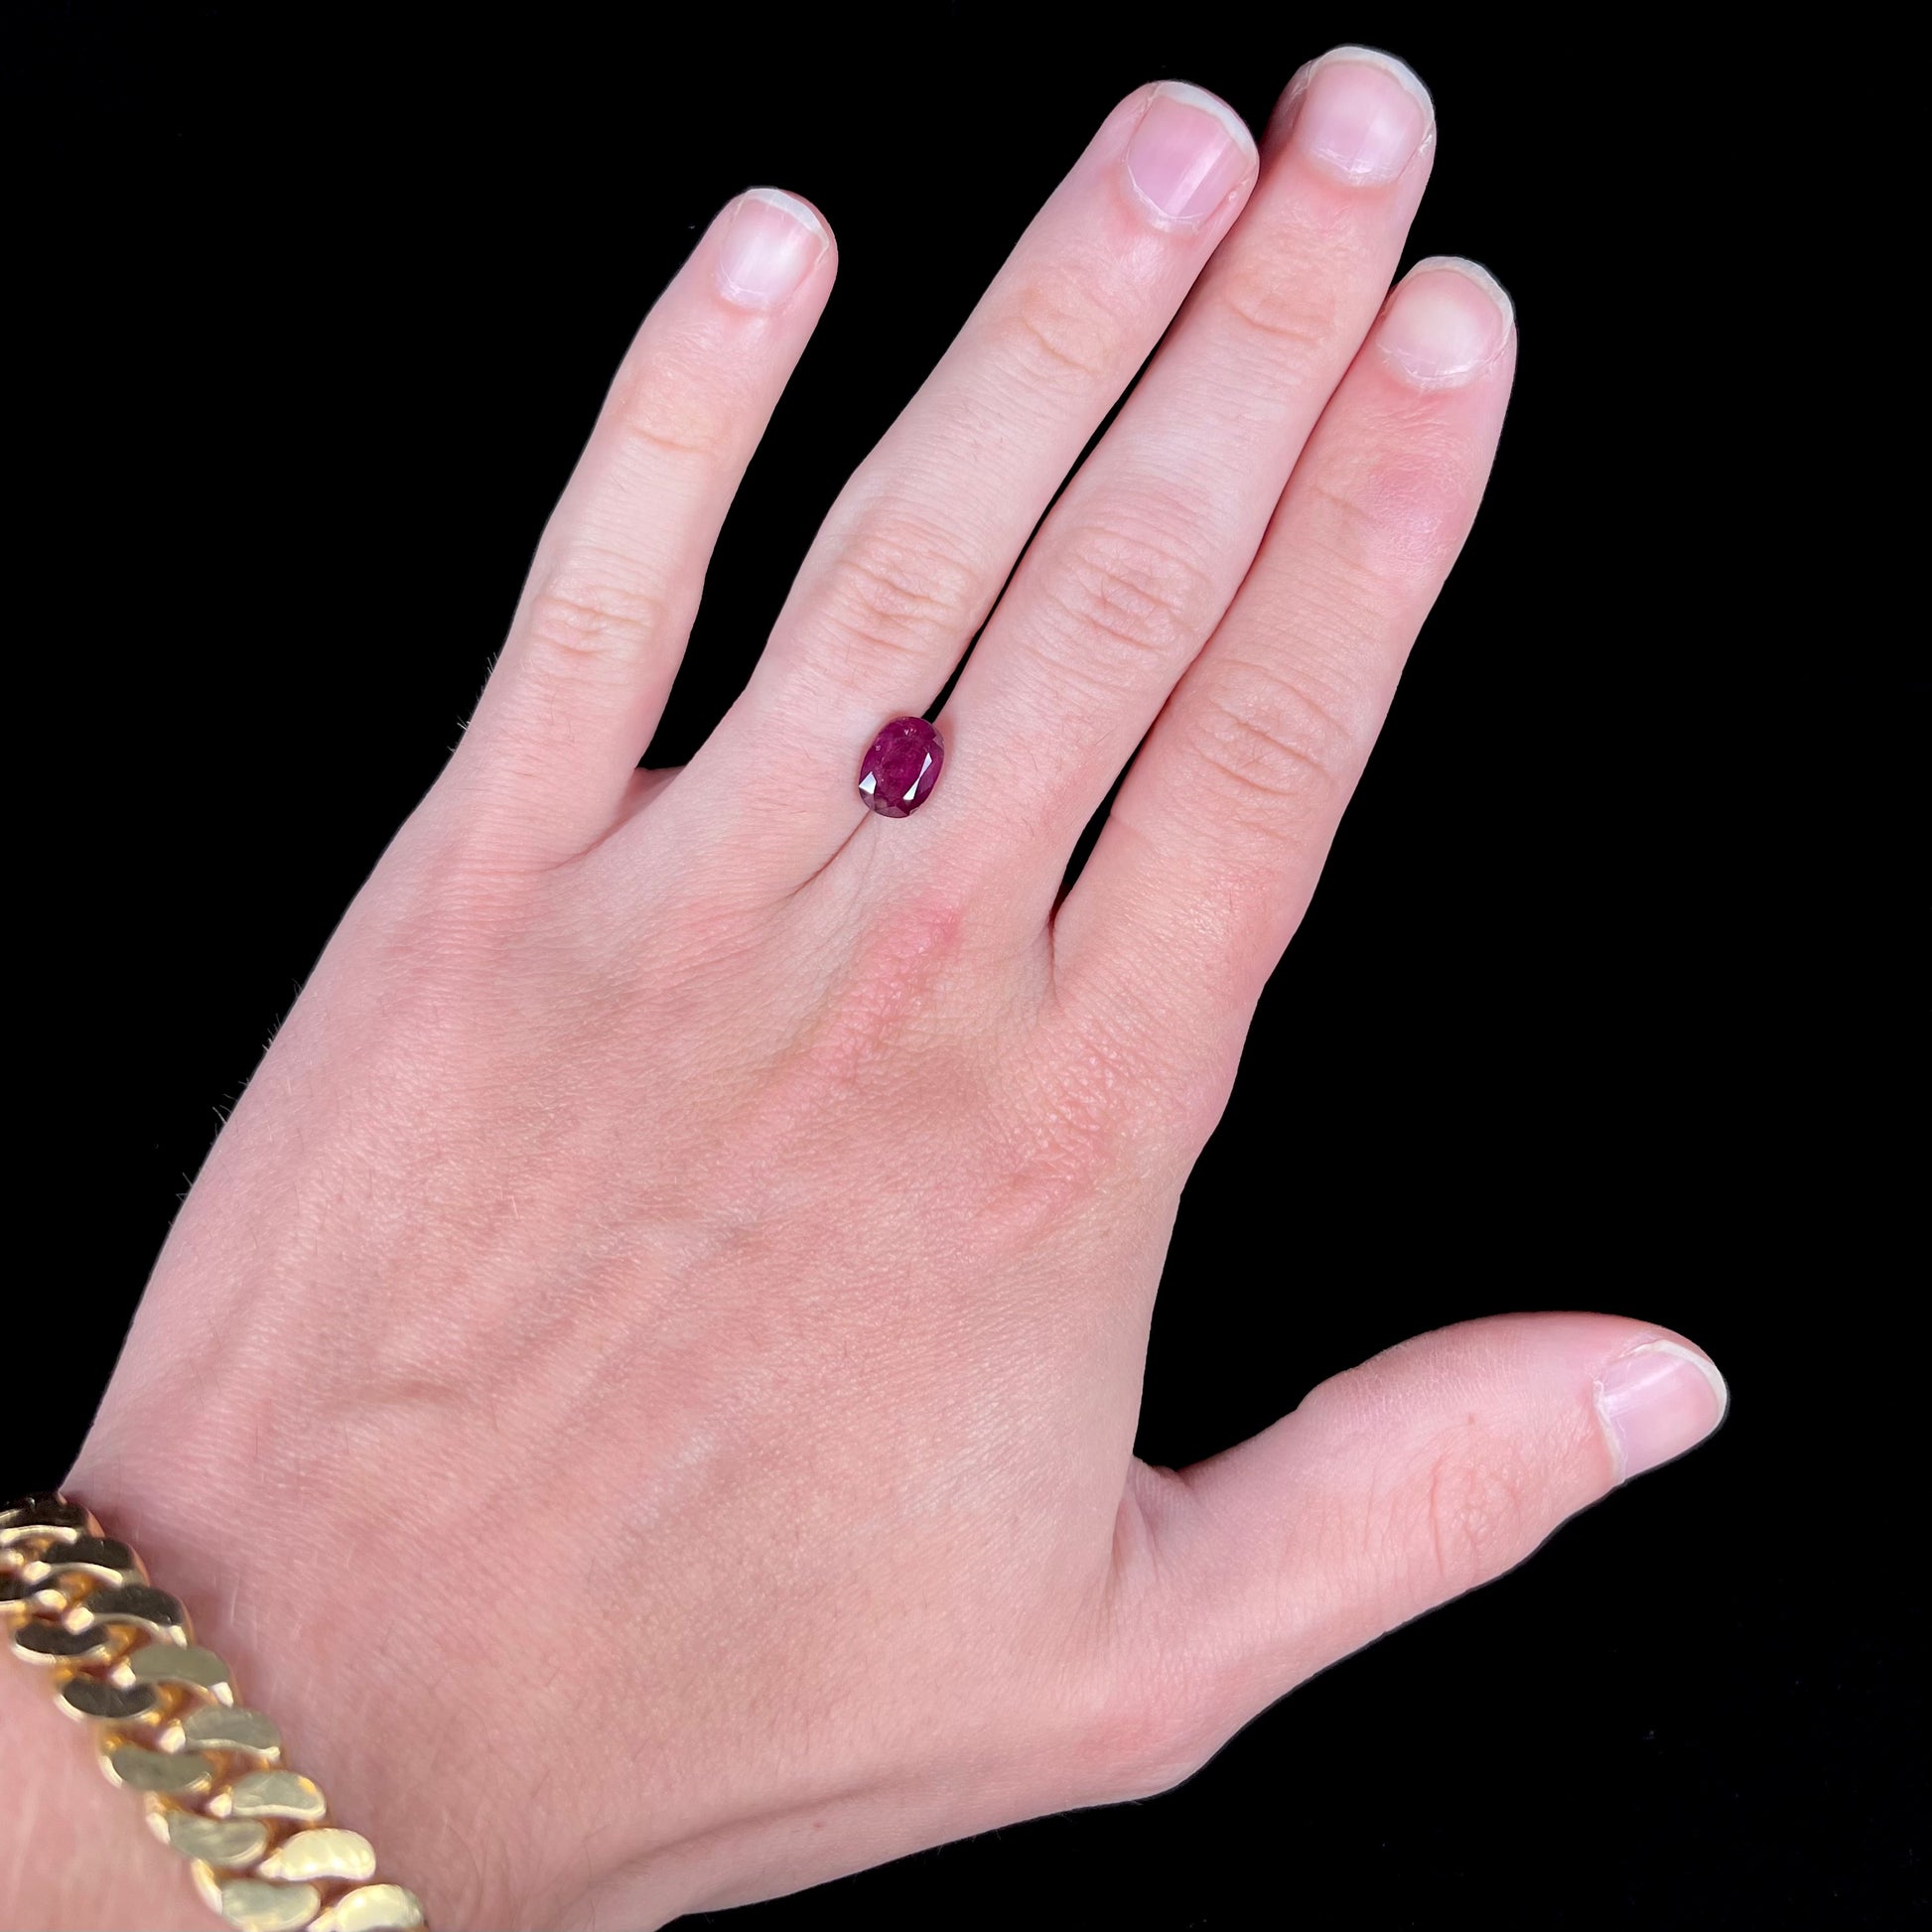 A loose, natural purplish ruby gemstone.  There is a small, minute chip on the girdle of the gem.